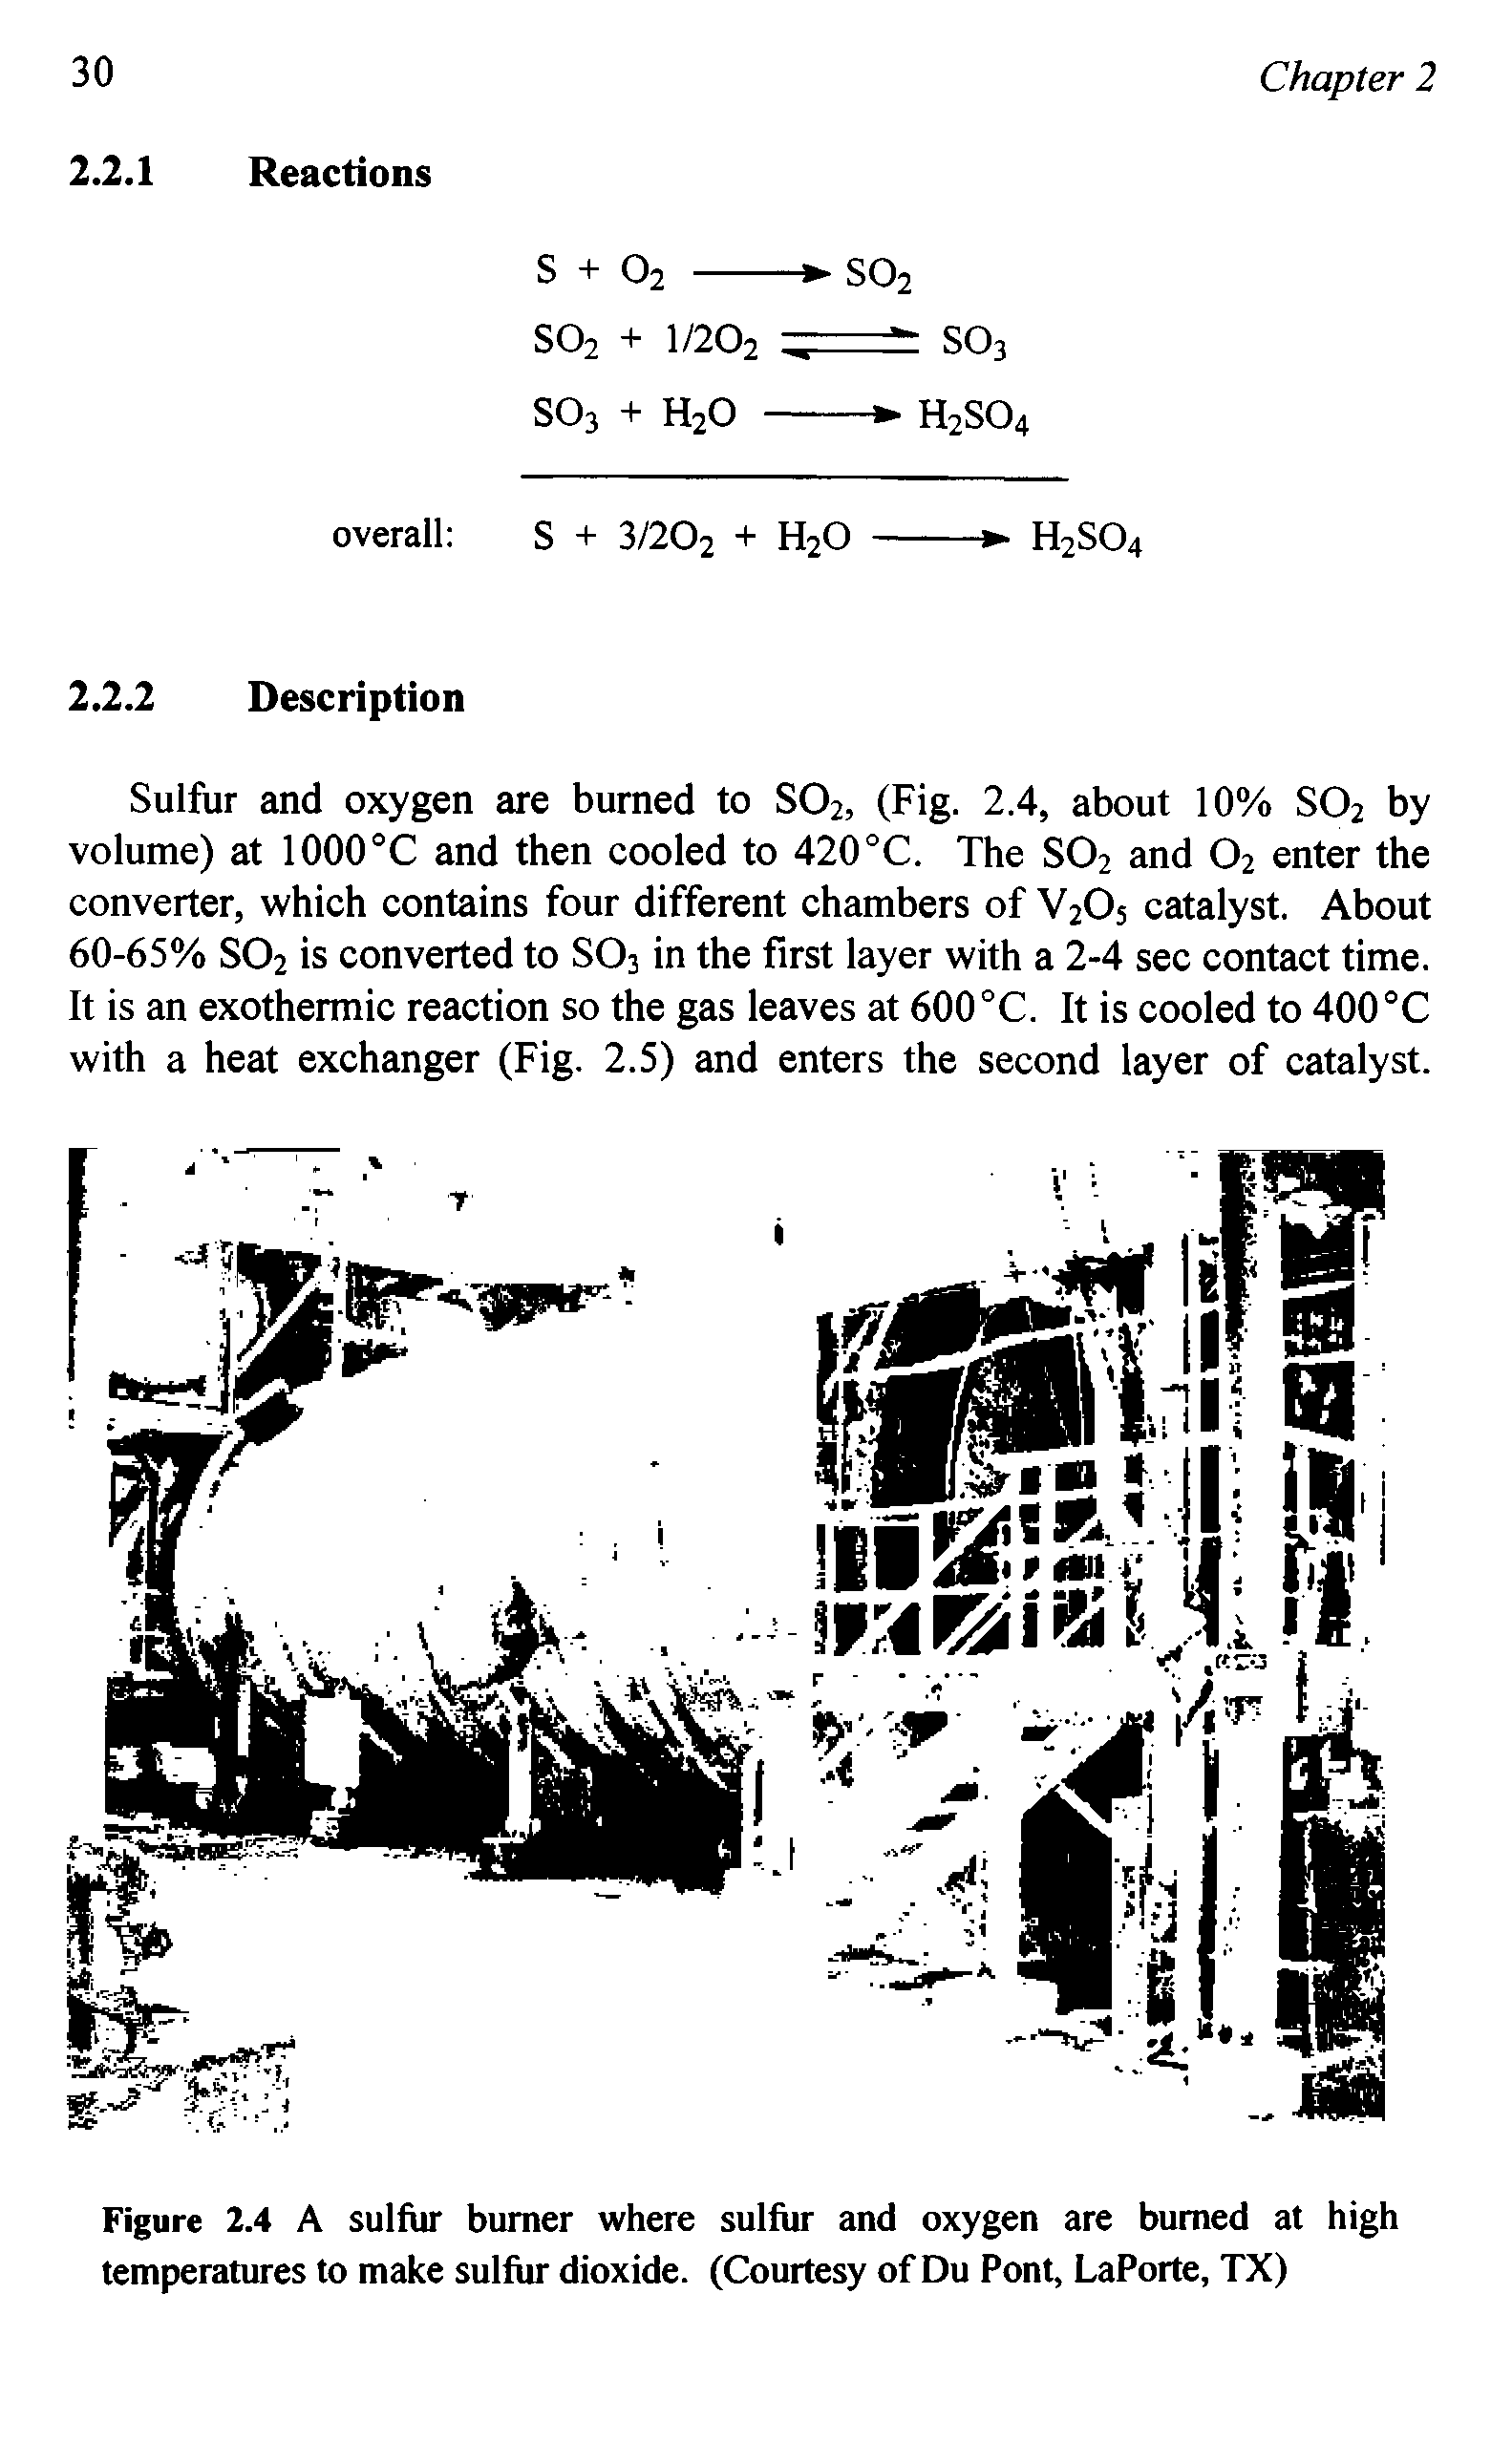 Figure 2.4 A sulfur burner where sulfur and oxygen are burned at high temperatures to make sulfur dioxide. (Courtesy of Du Pont, LaPorte, TX)...